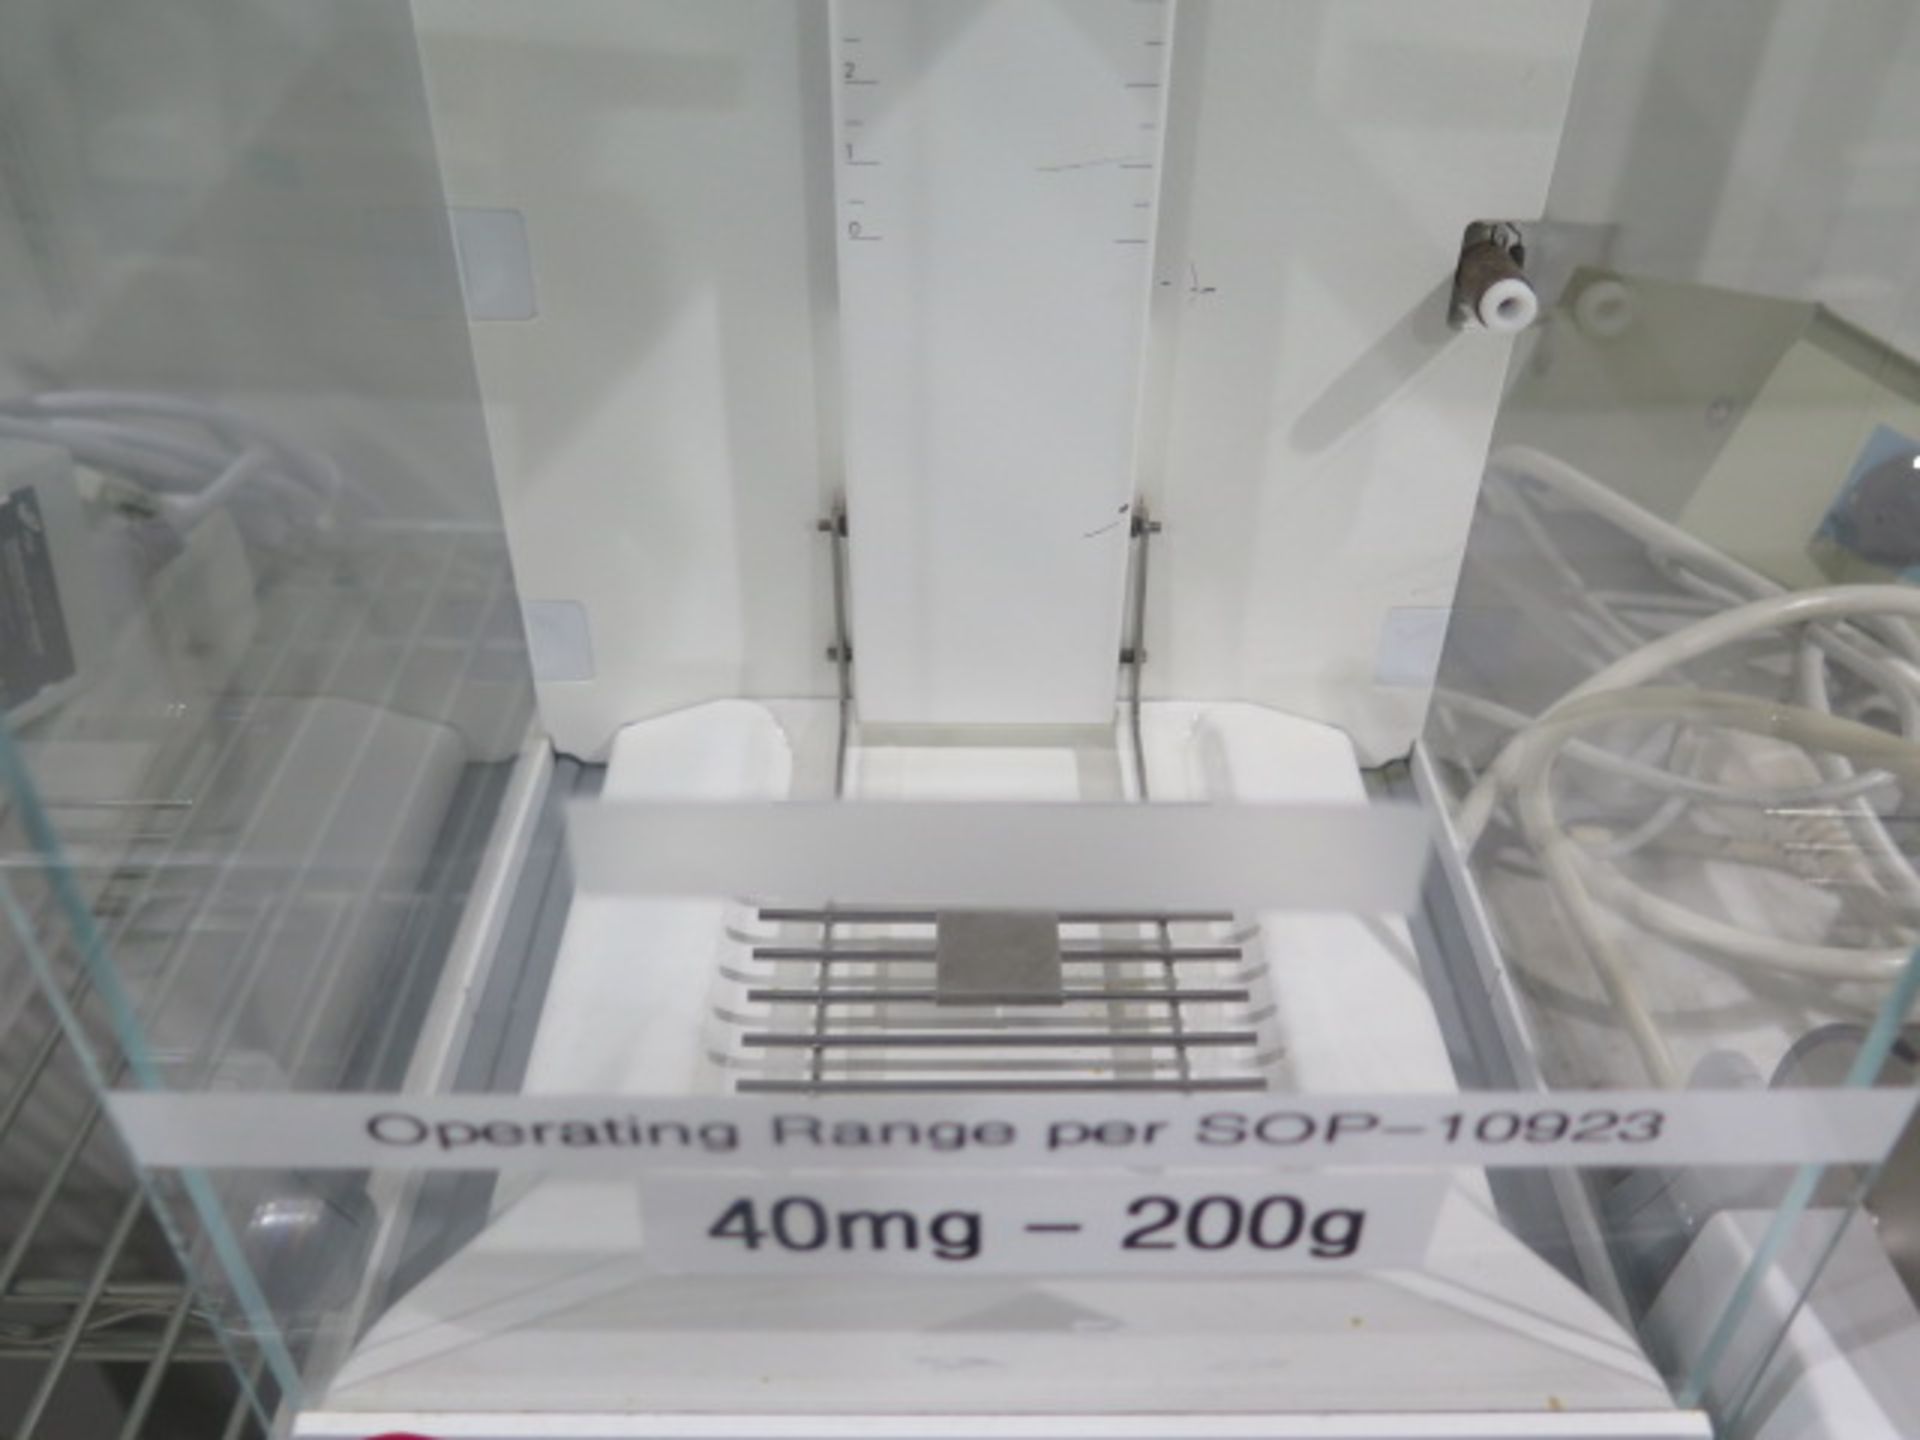 Mettler Toledo XP205 DeltaRange Analytical Balance Scale 0.01mg-220g w/ Static Detect, SOLD AS IS - Image 5 of 9